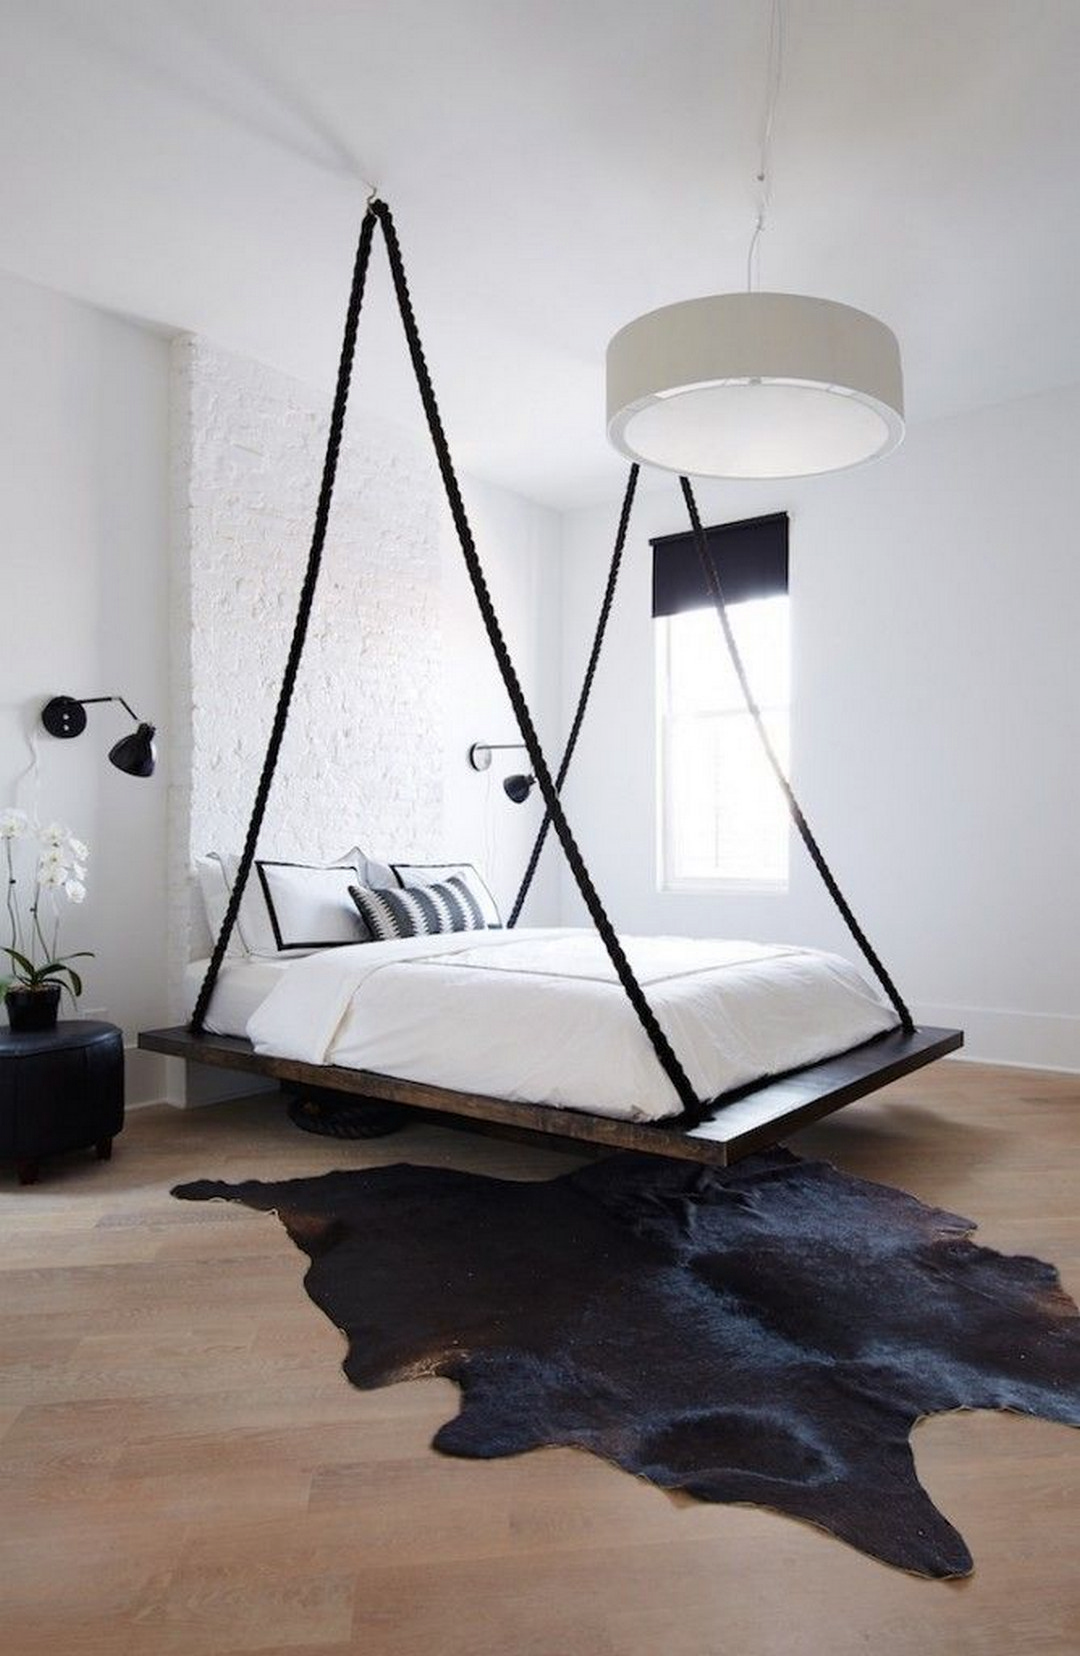 bed hanging surprisingly amazing source